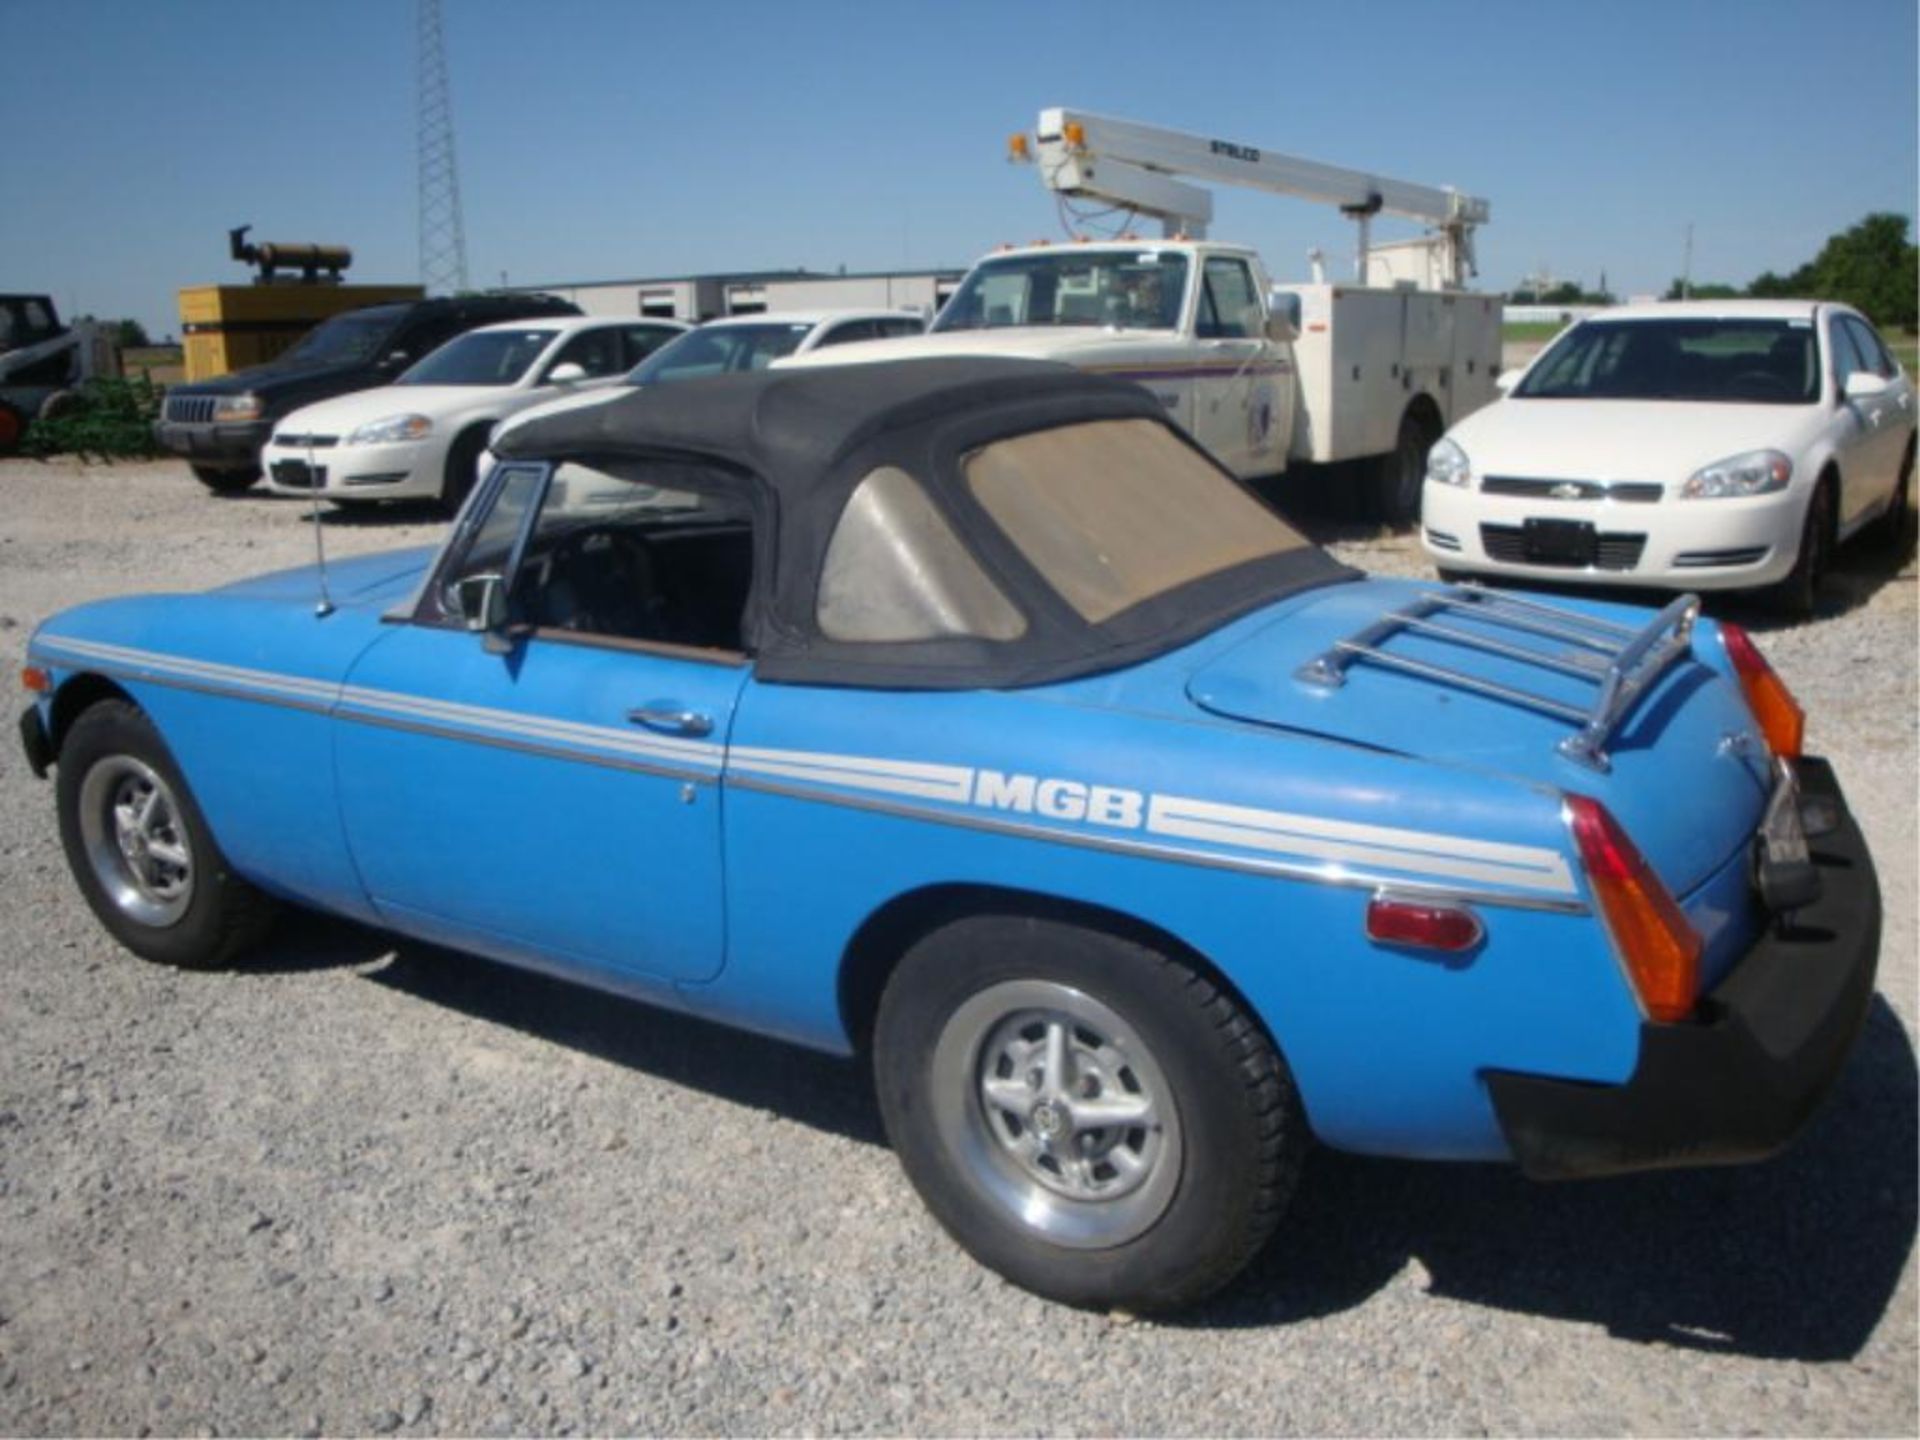 (Title) 1979 MGB, 14,890 miles on ODO,New in 2014: fuel pump, gas tank, clutch, radiator rodded - Image 25 of 34